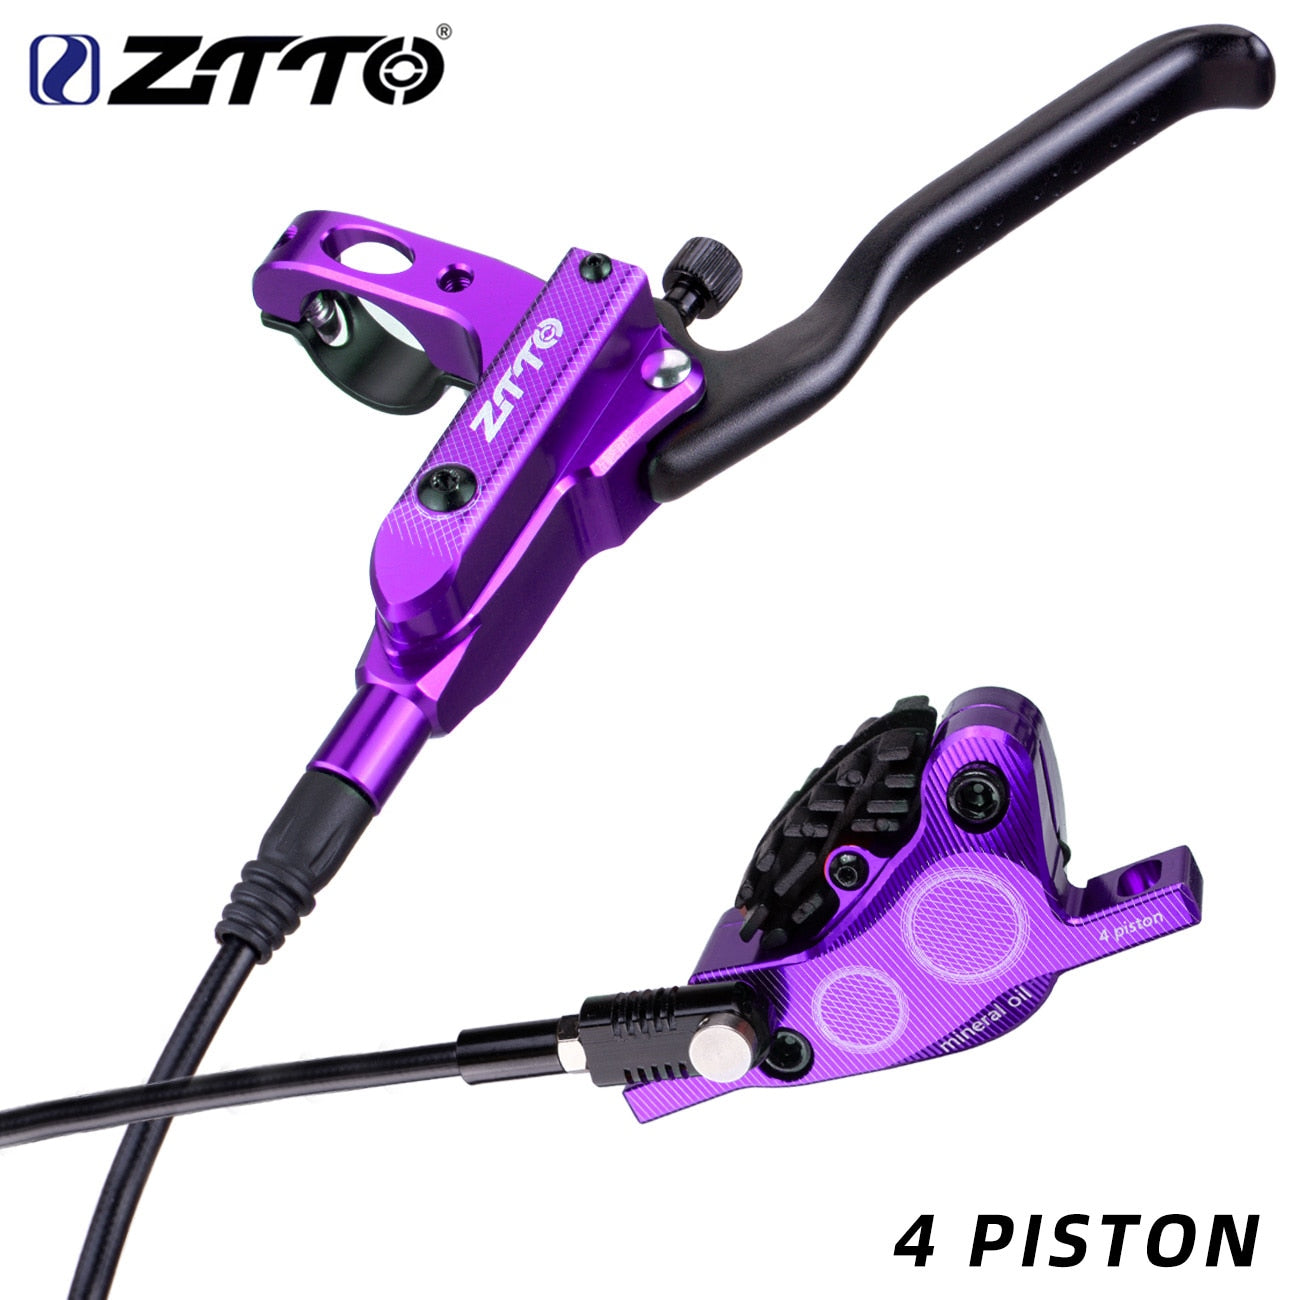 ZTTO MTB 4 Piston Hydraulic Disc Brake M840 With Cooling Full Meatal Pad CNC Tech Mineral Oil For AM Enduro Bicycle E4 ZEE M8120